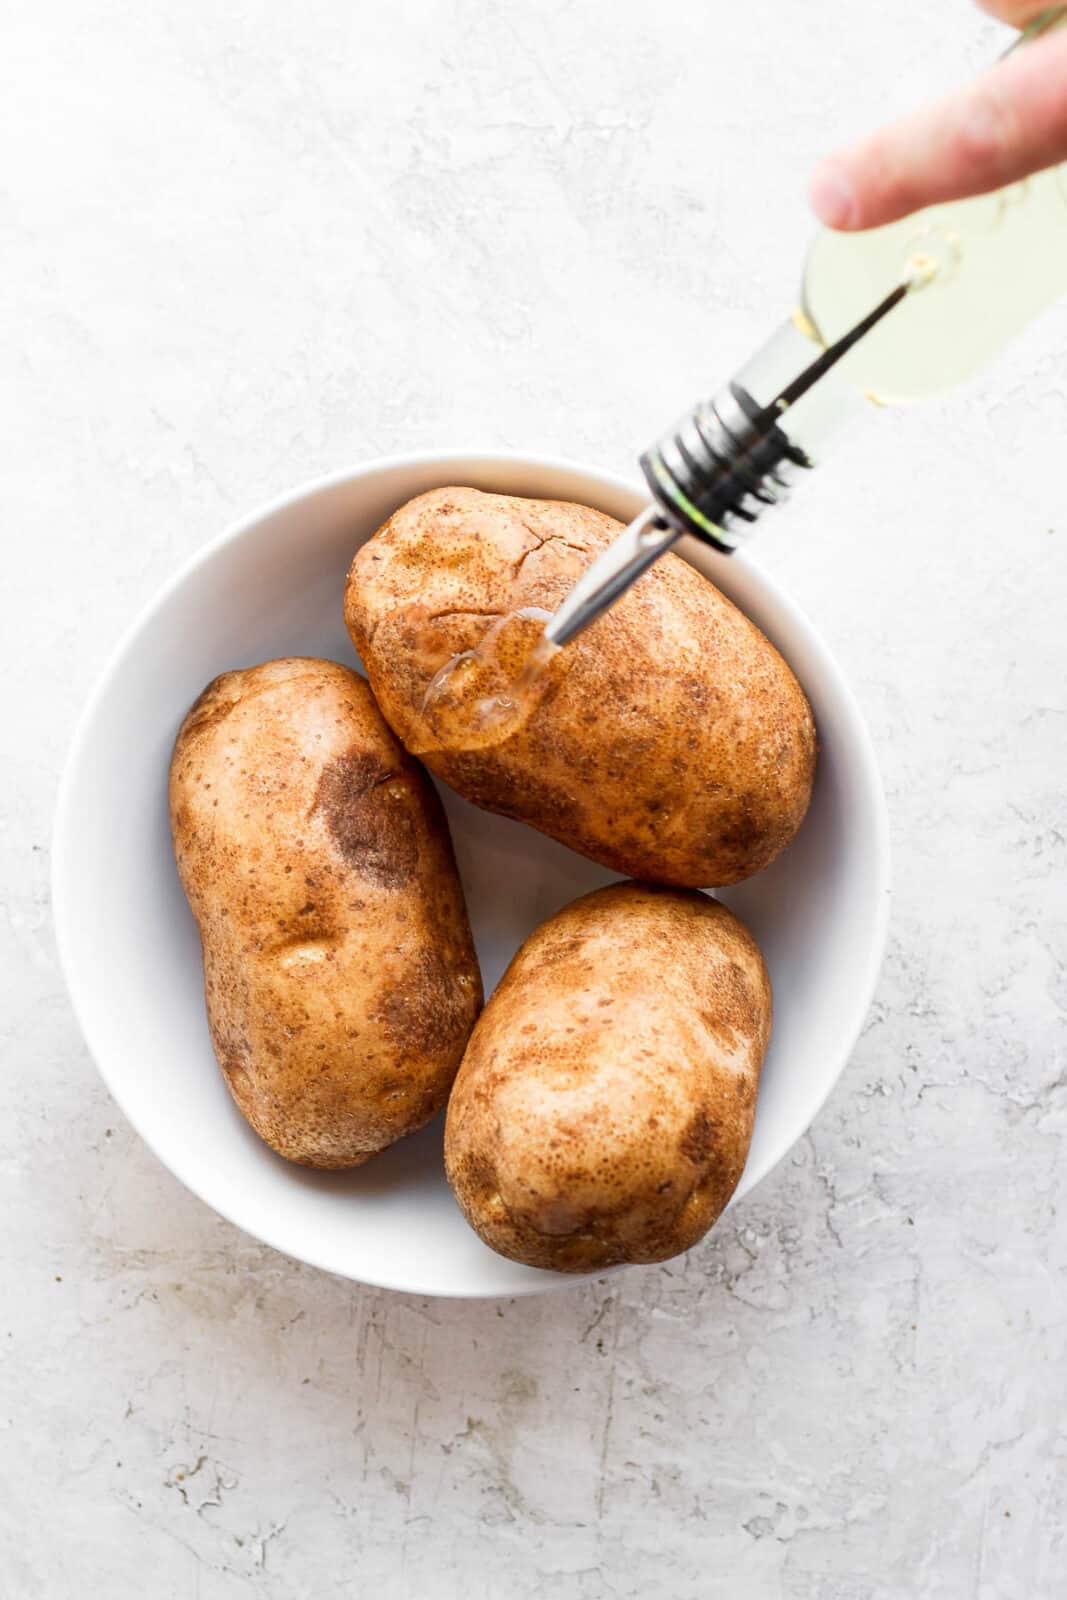 Three potatoes in a white bowl being drizzled with oil.